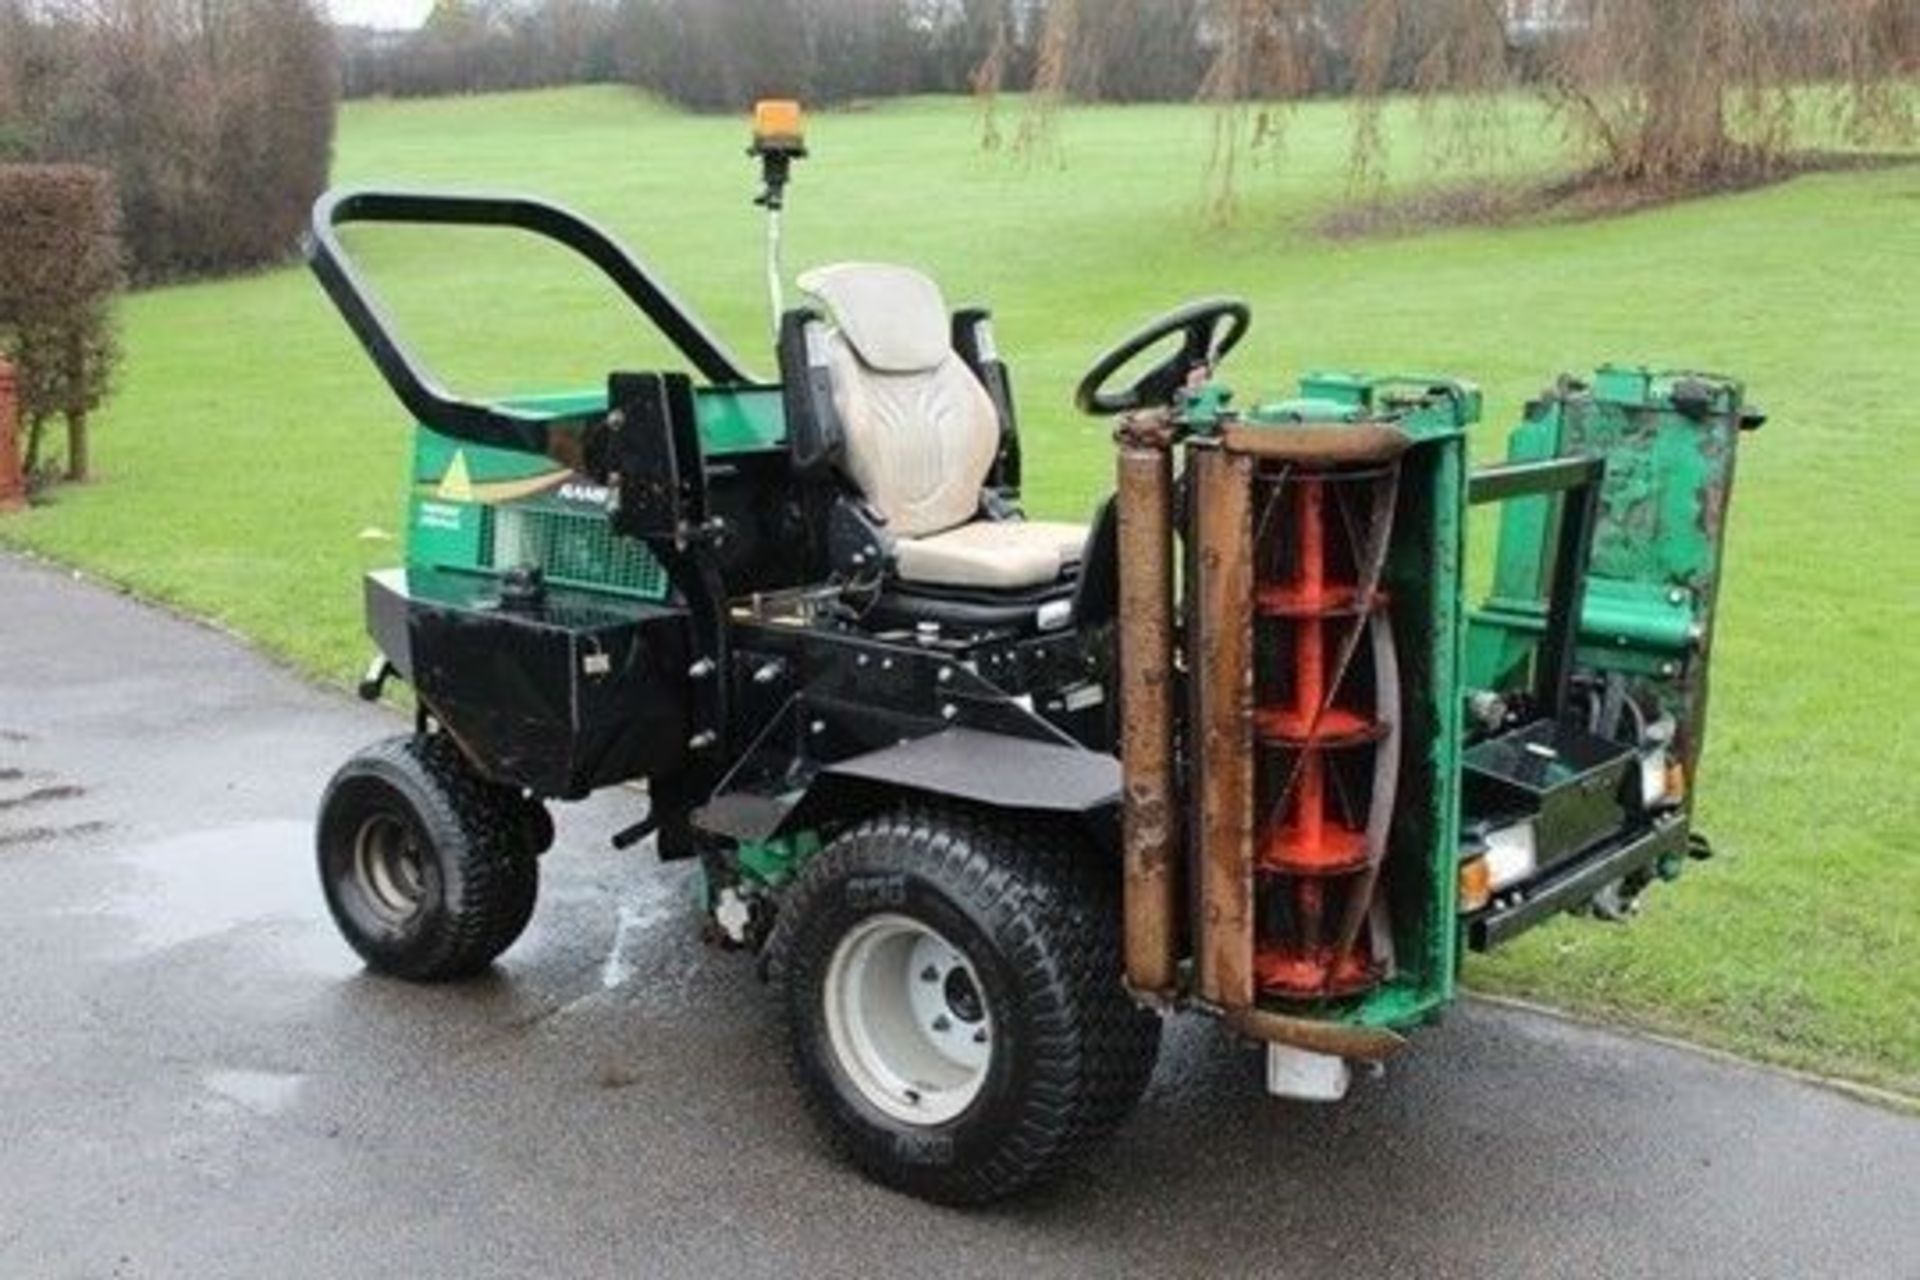 2010 Ransomes Parkway 2250 Plus Ride On Cylinder Mower - Image 7 of 8